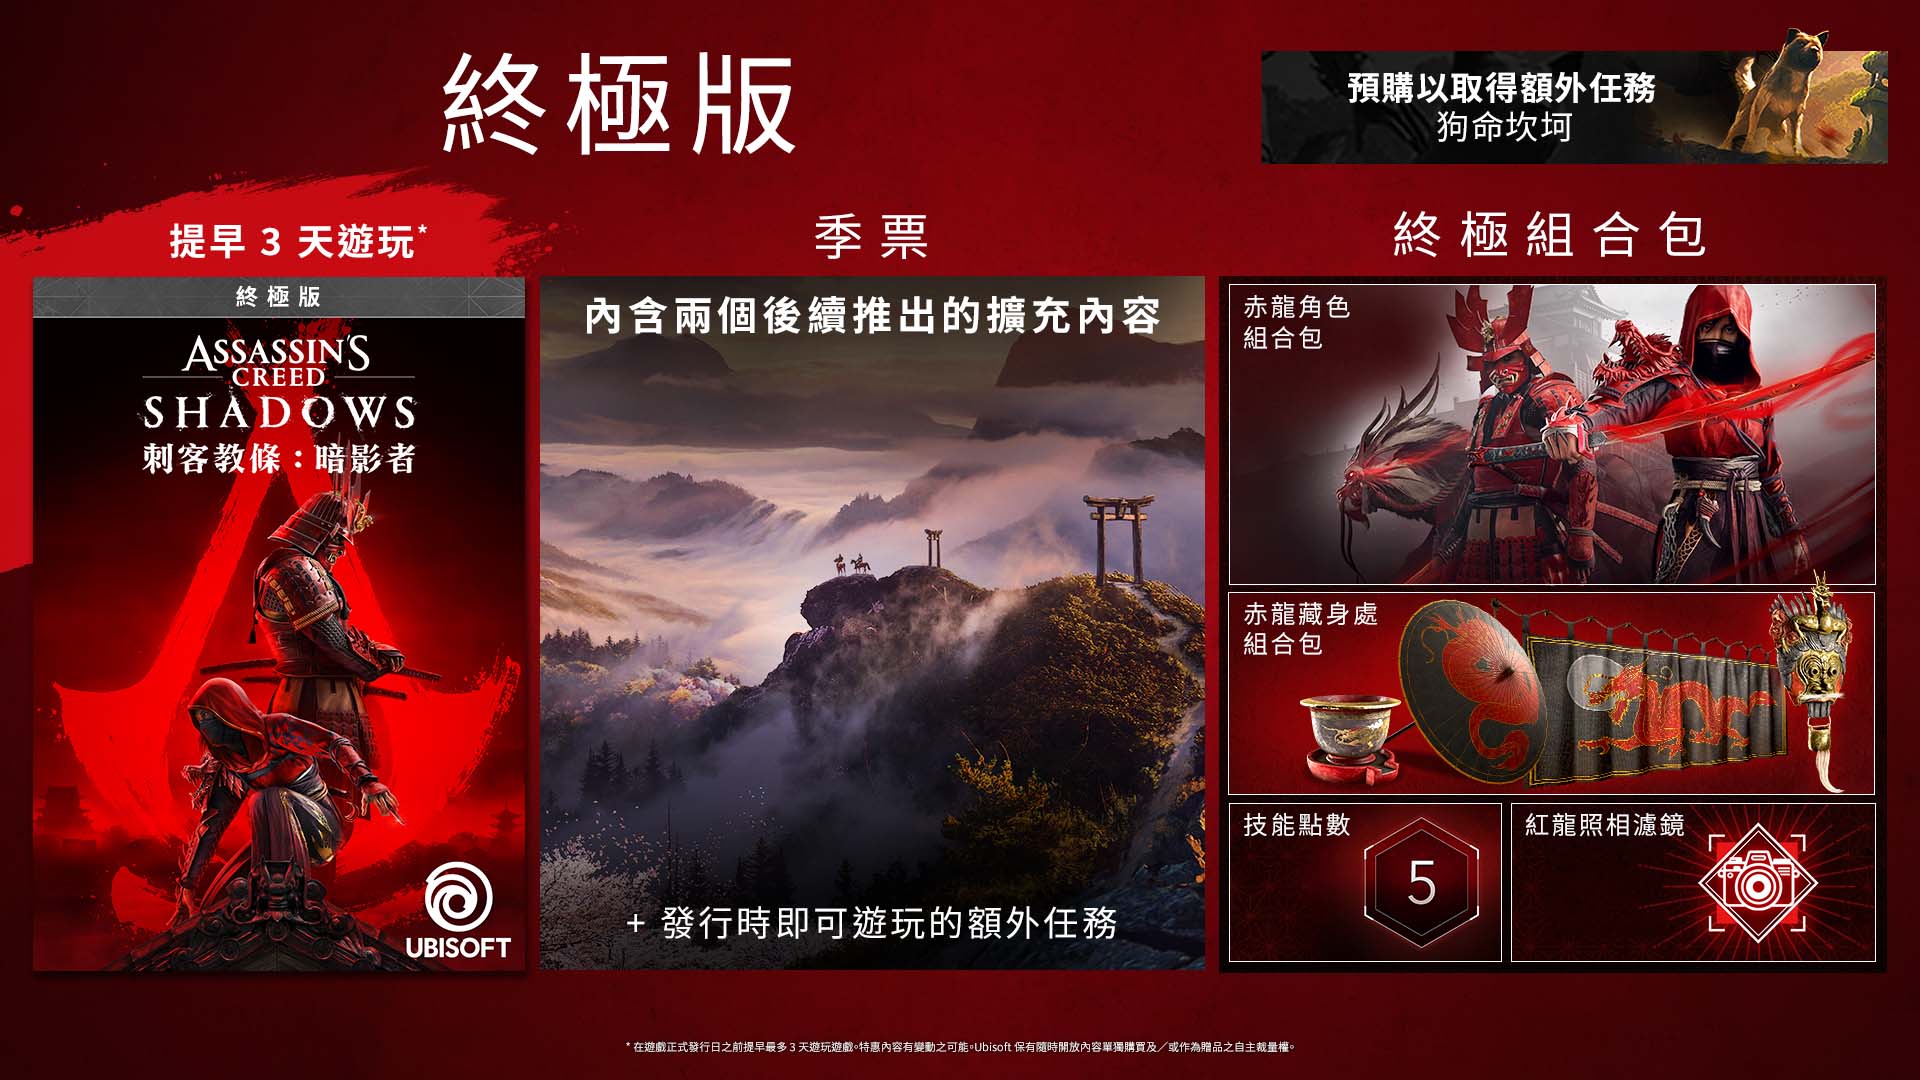 RED_MOCKUP_ULTIMATE_1920x1080_TCH